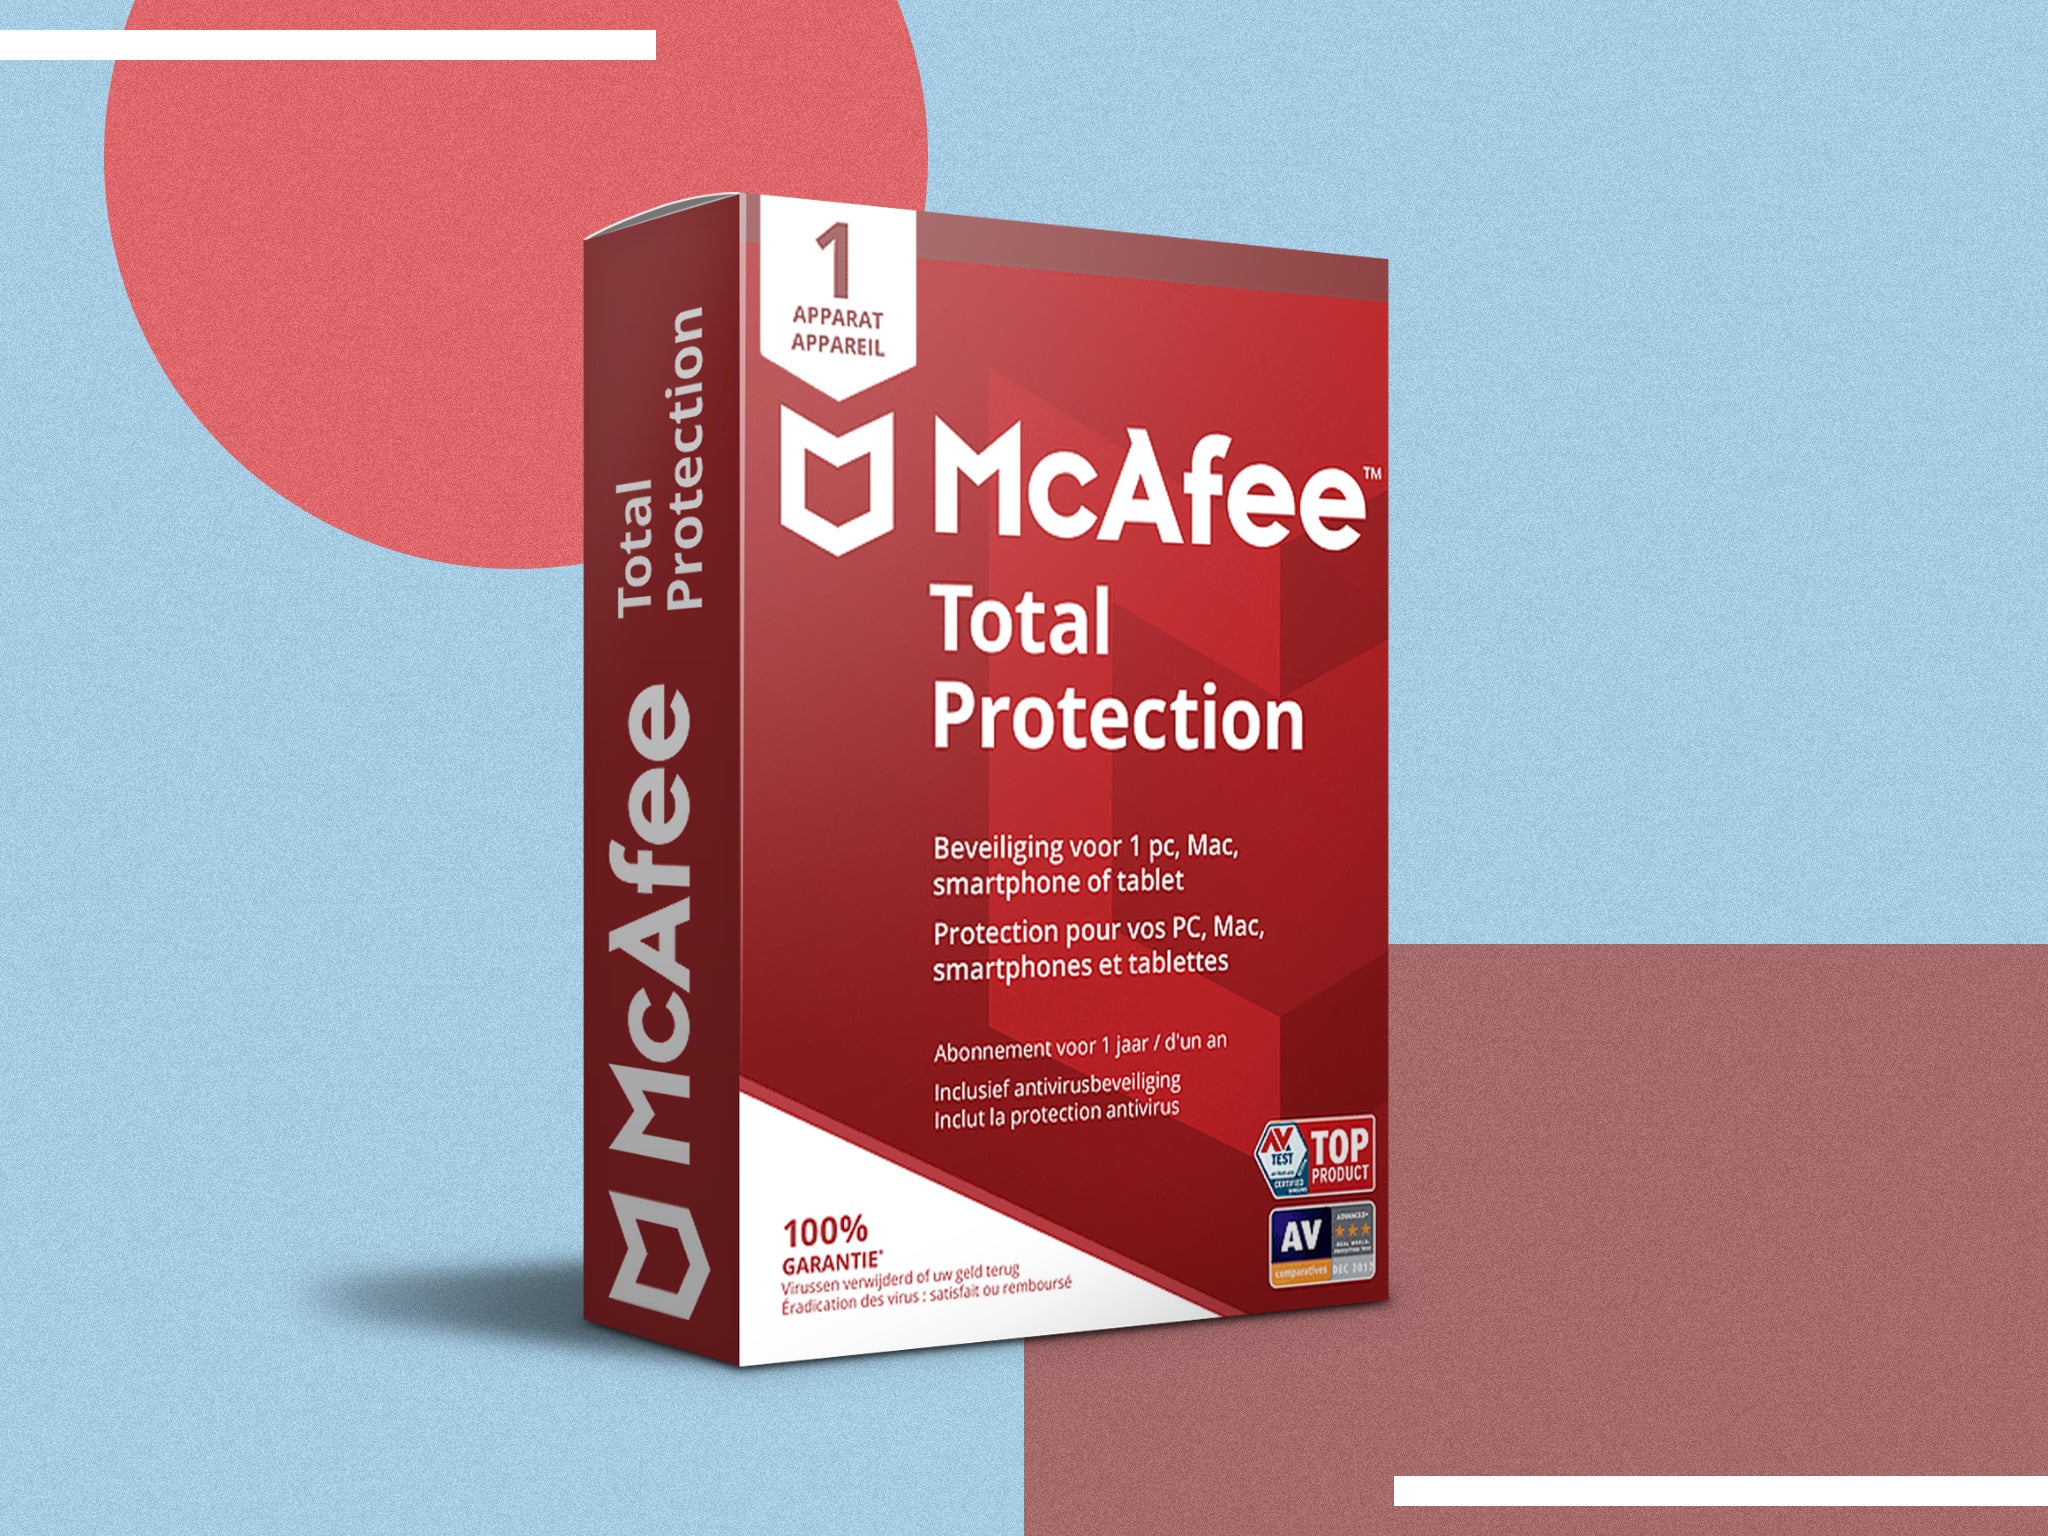 https://static.independent.co.uk/2021/07/29/17/mcafee%20review%20indybest%20copy.jpg